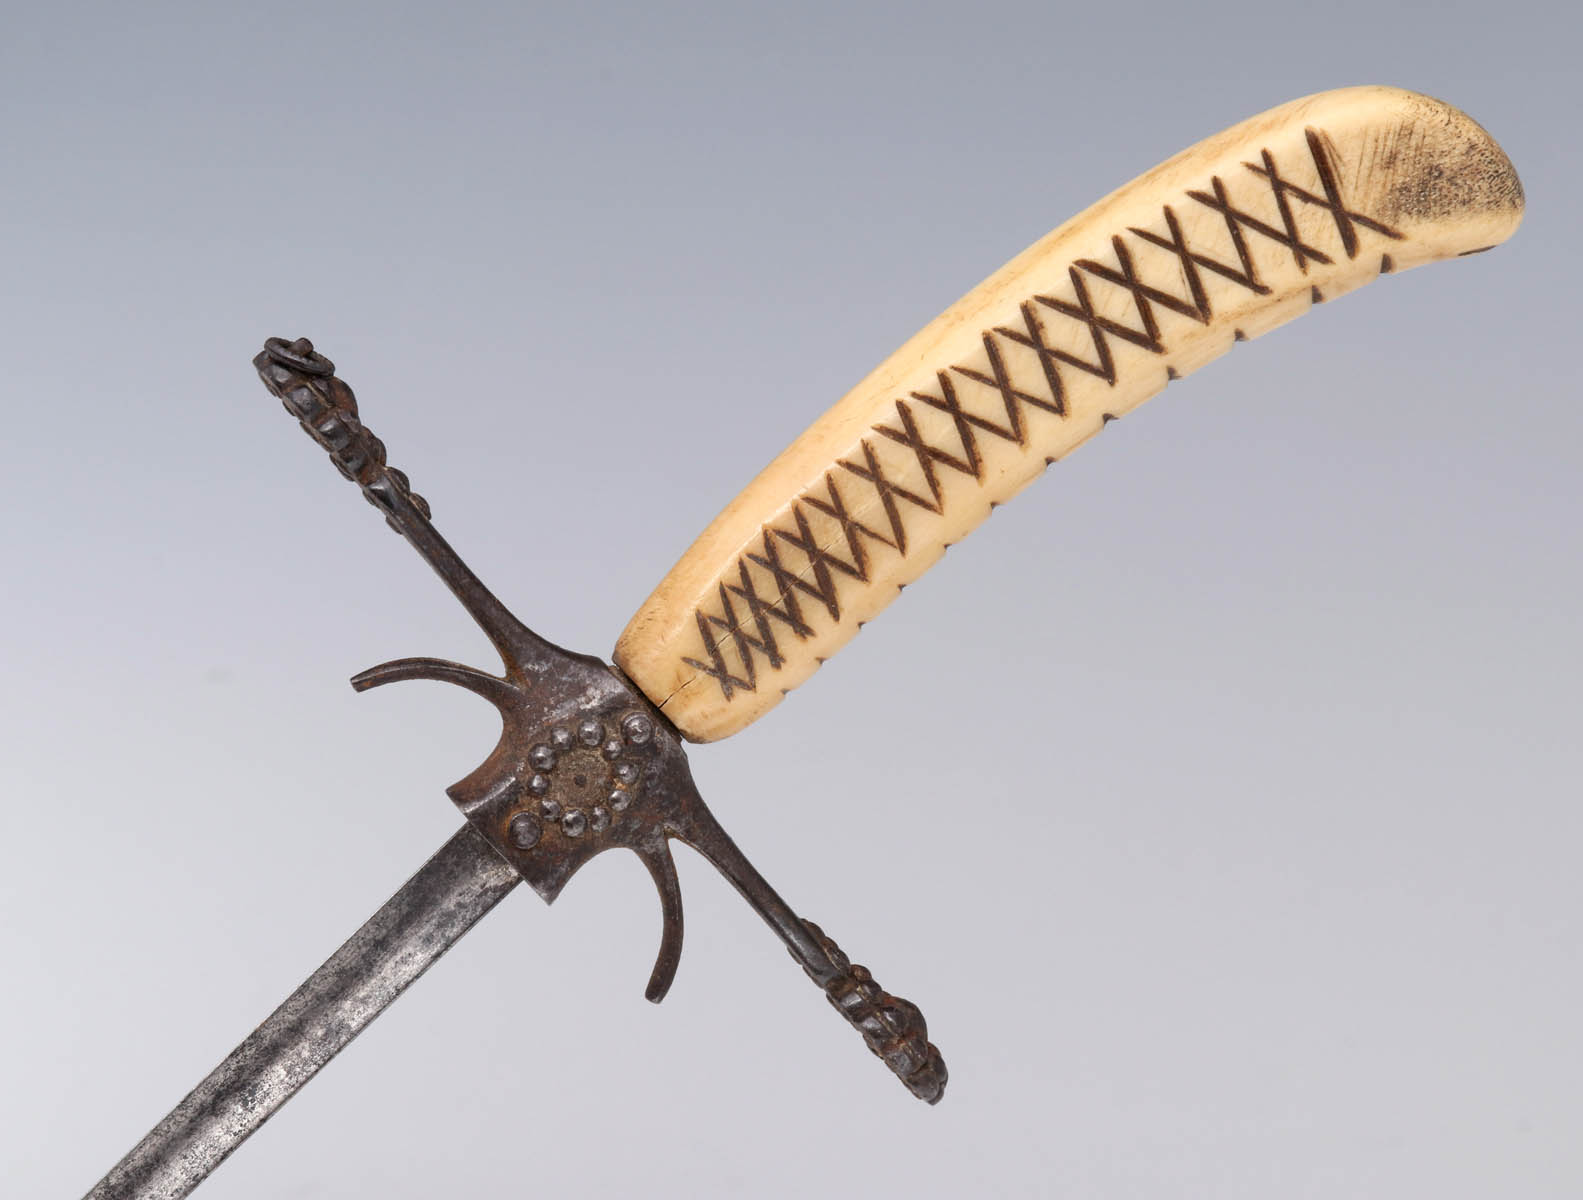 A MEDIEVAL STYLE DAGGER WITH BONE HANDLE